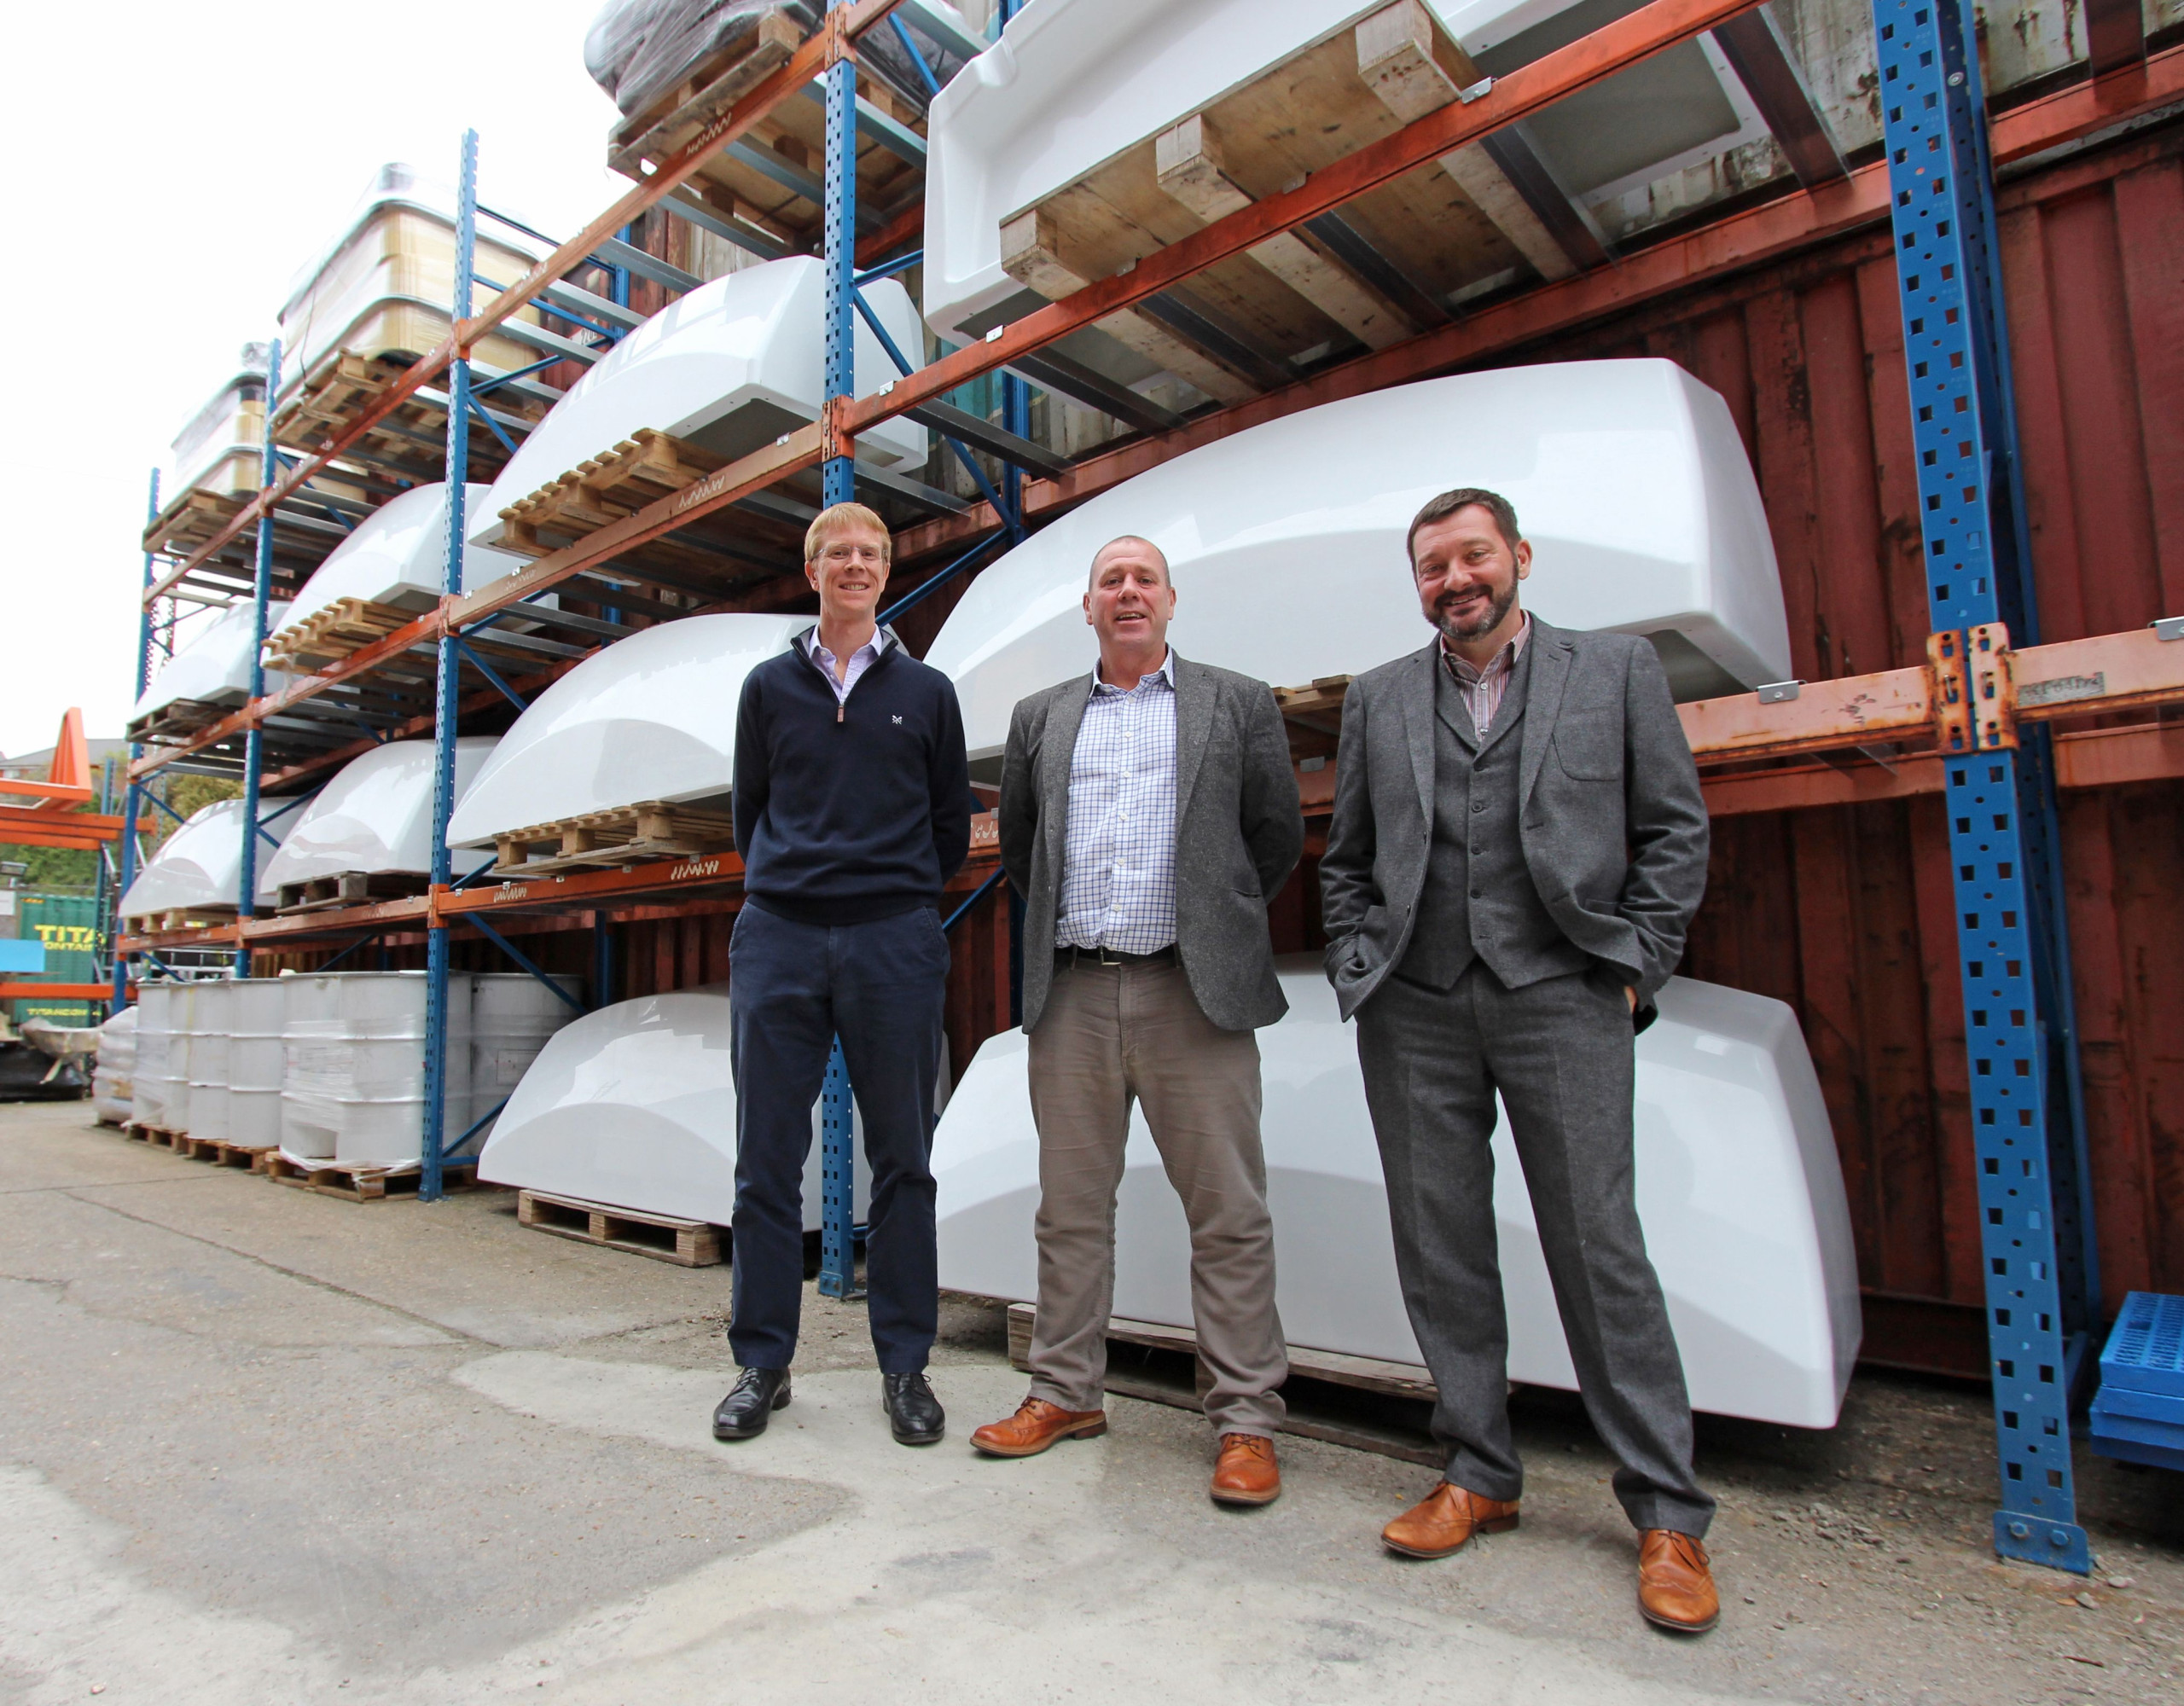 Sean Milbank, Andy Mayne and Mark Went following acquisition of Sui Generis International Ltd